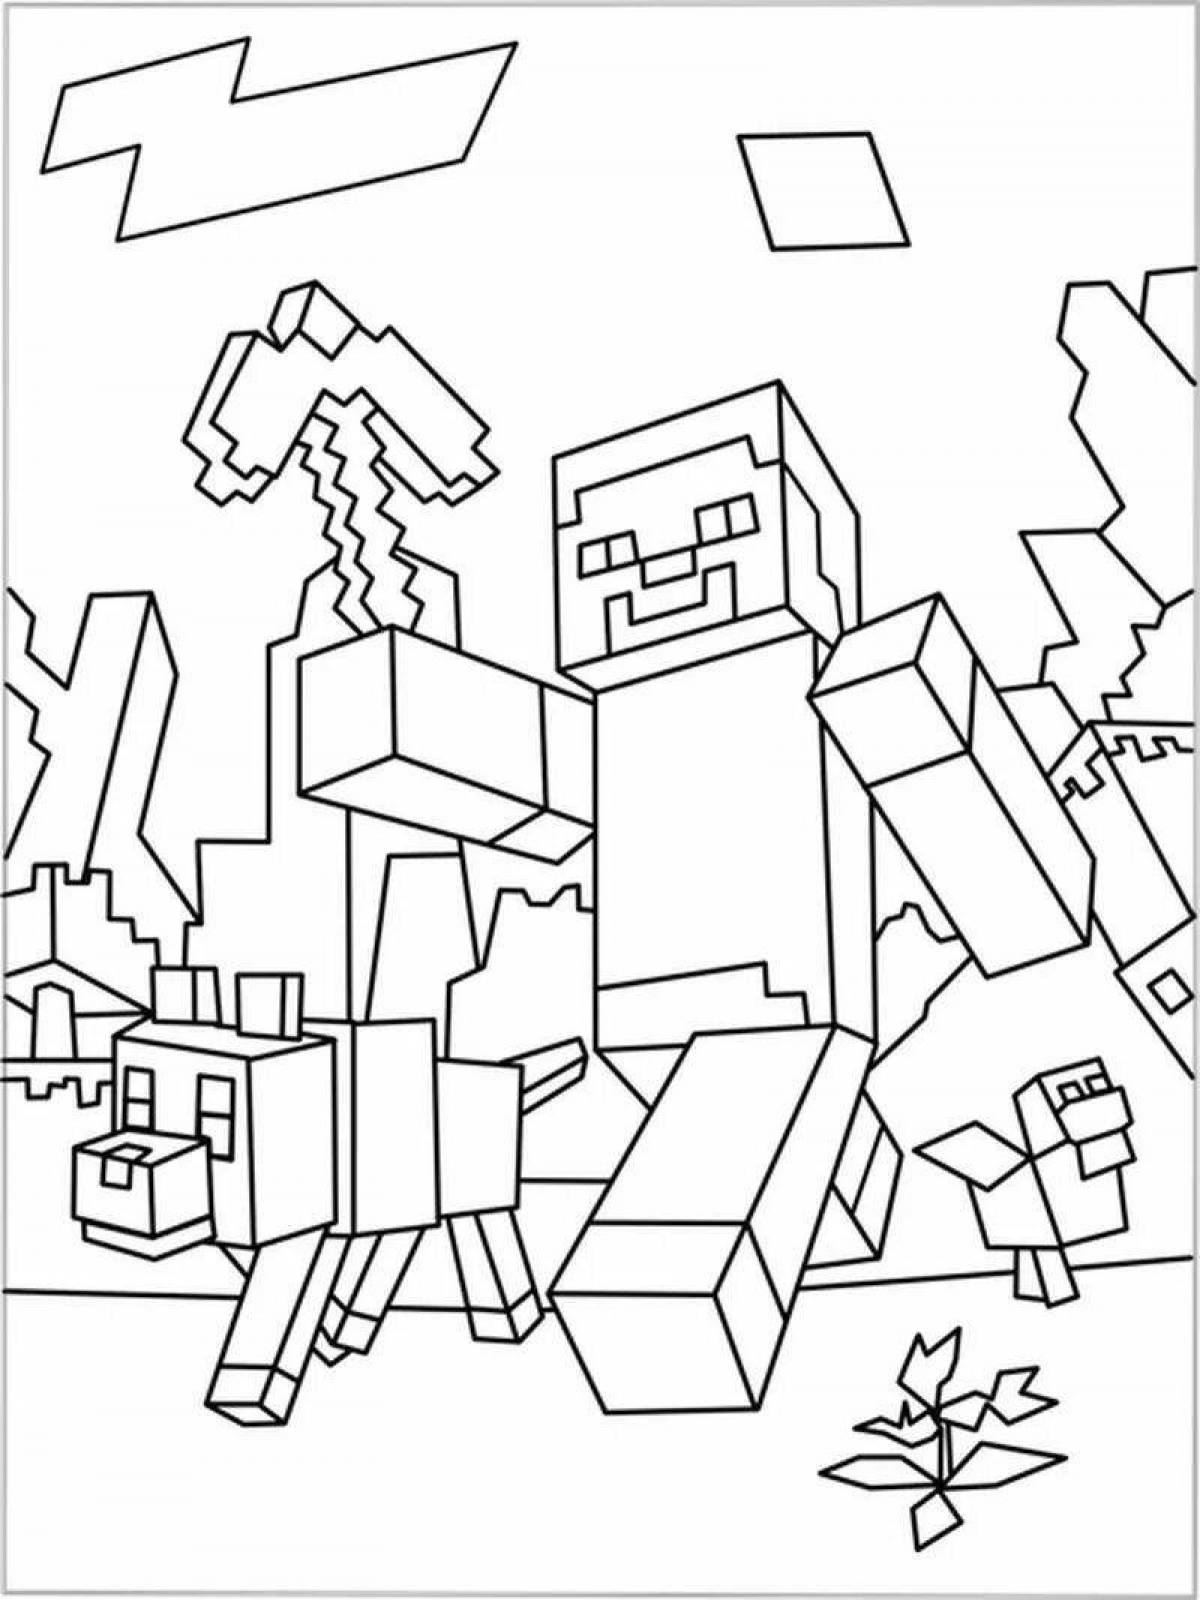 Colorful minecraft coloring page all mobs